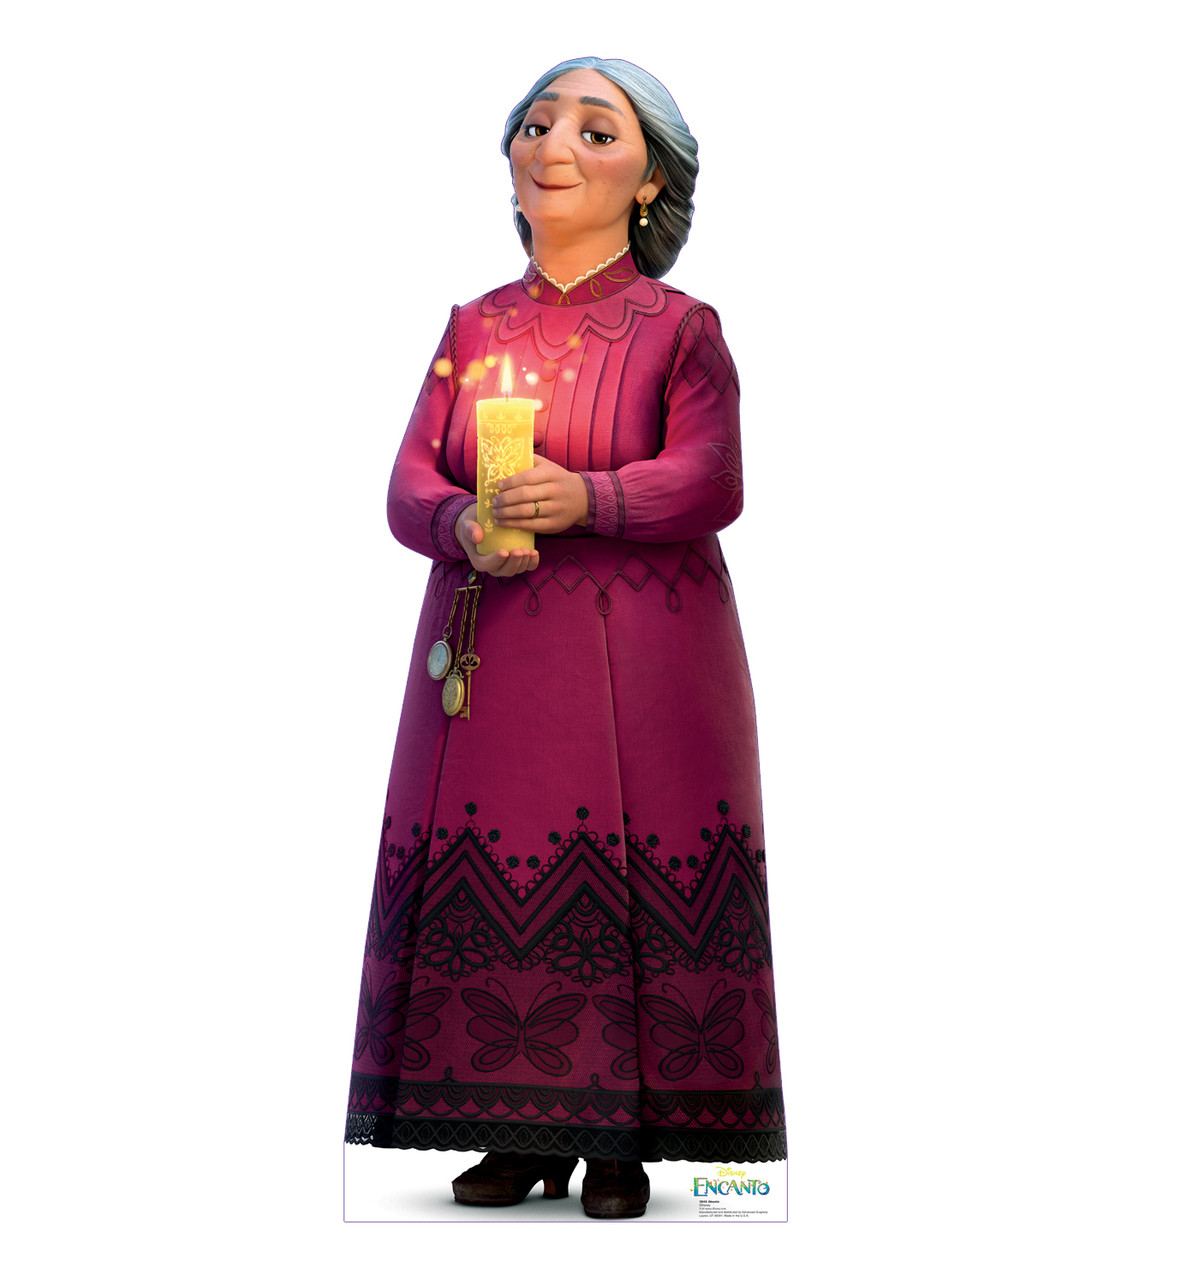 Life-size cardboard standee of Abuela from the Disney's movie Encanto.